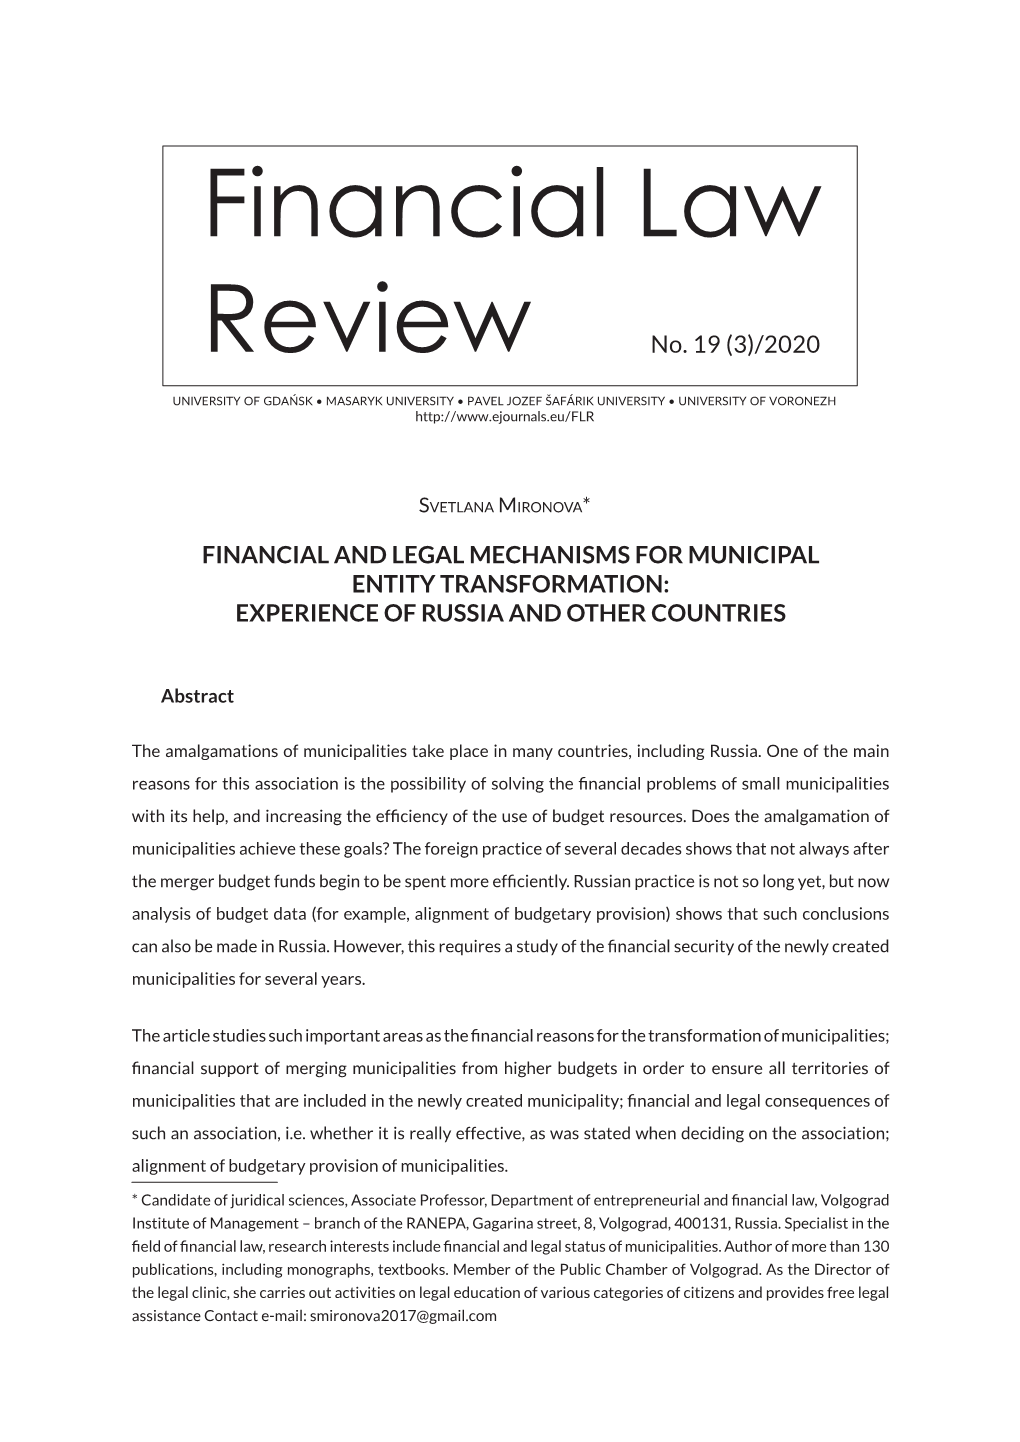 Financial and Legal Mechanisms for Municipal Entity Transformation: Experience of Russia and Other Countries